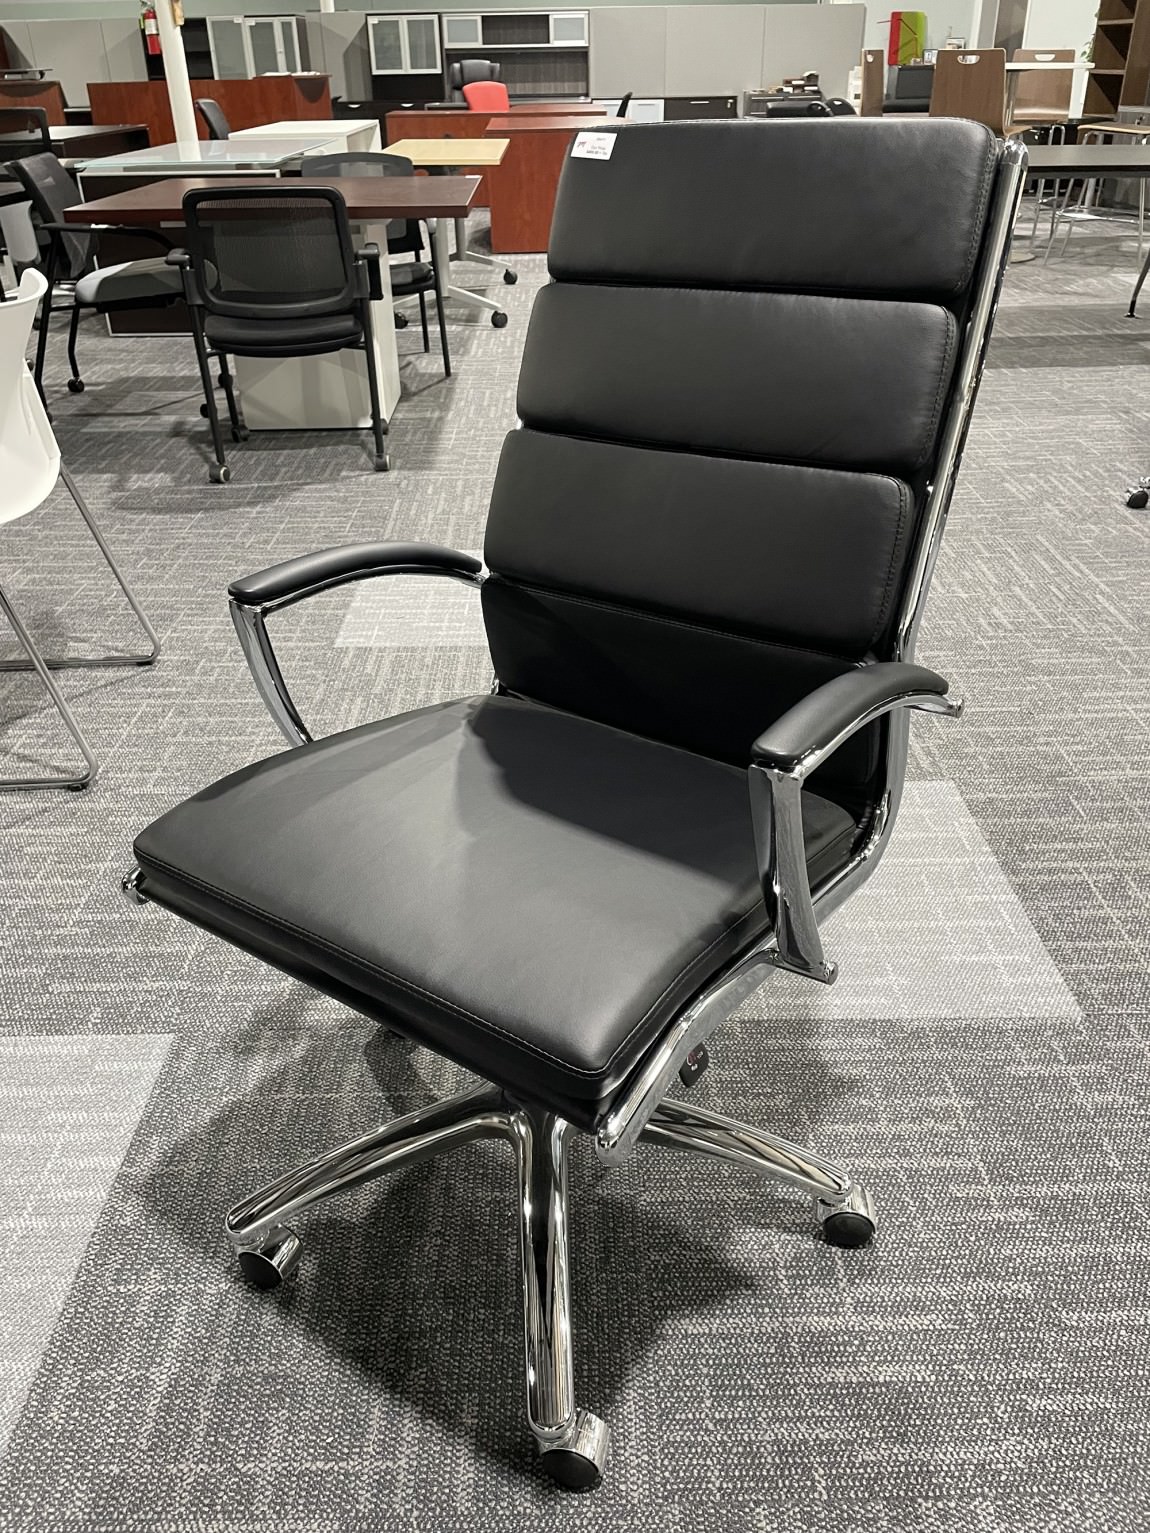 Black Conference Room Chairs - 7 Available